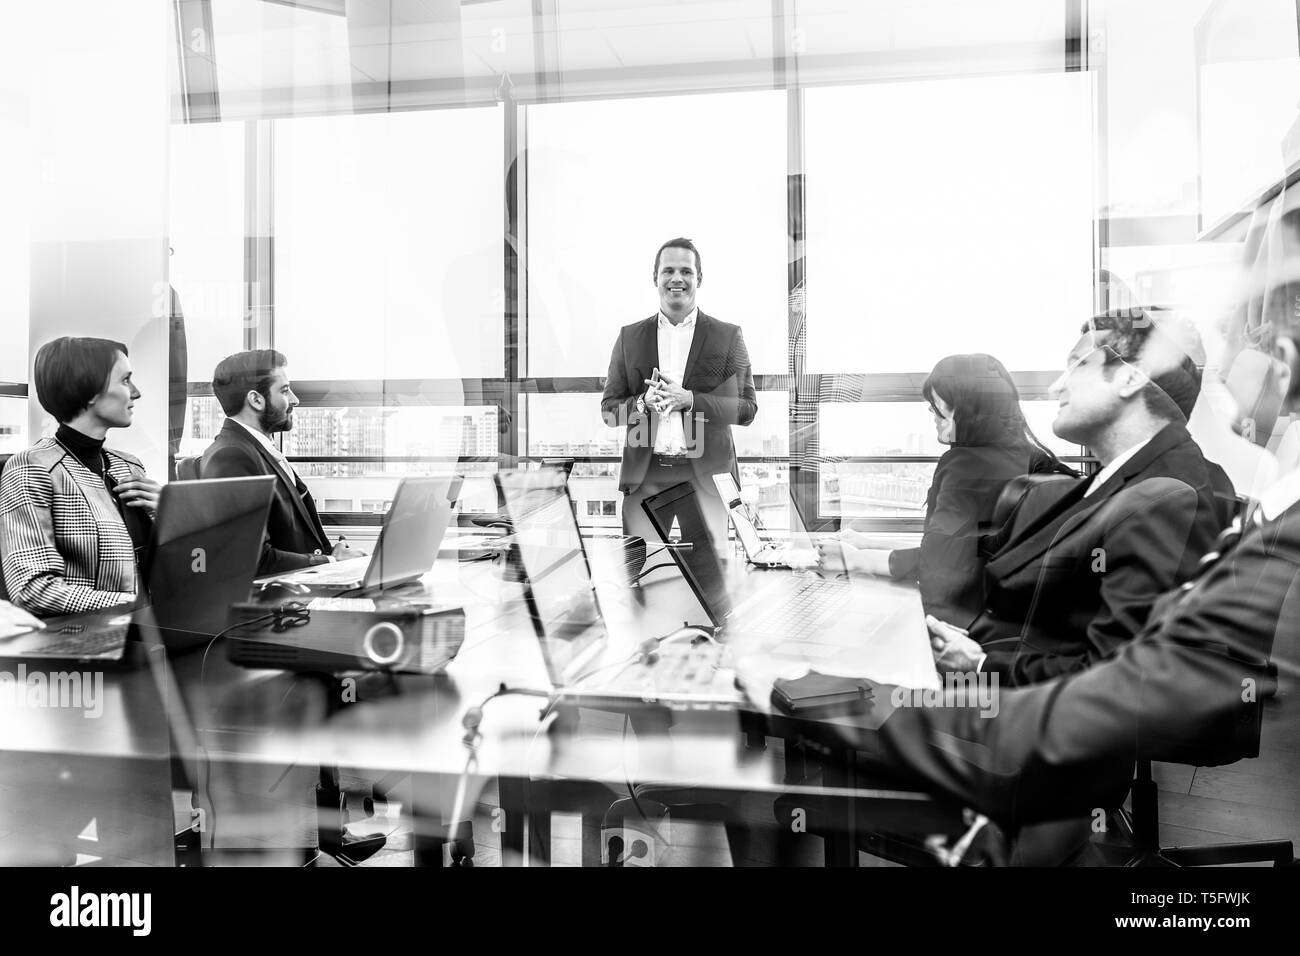 Manager di successo aziendale leader del team business office meeting. Foto Stock